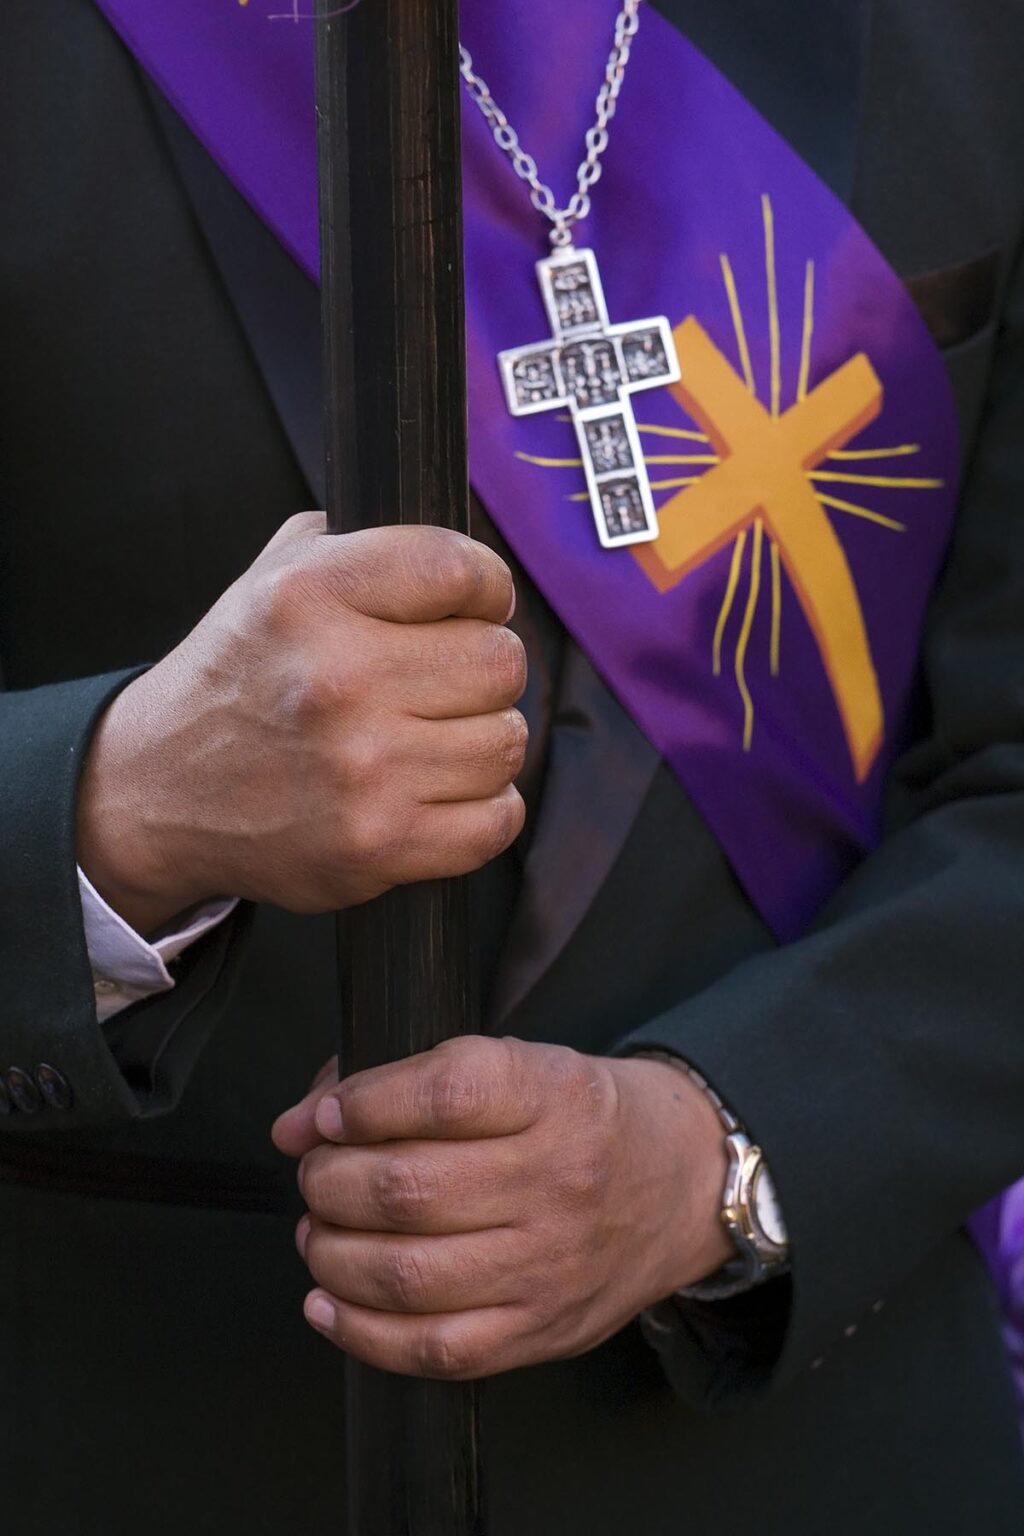 PRIEST holds a staff during the EASTER PROCESSION - SAN MIGUEL DE ALLENDE, MEXICO